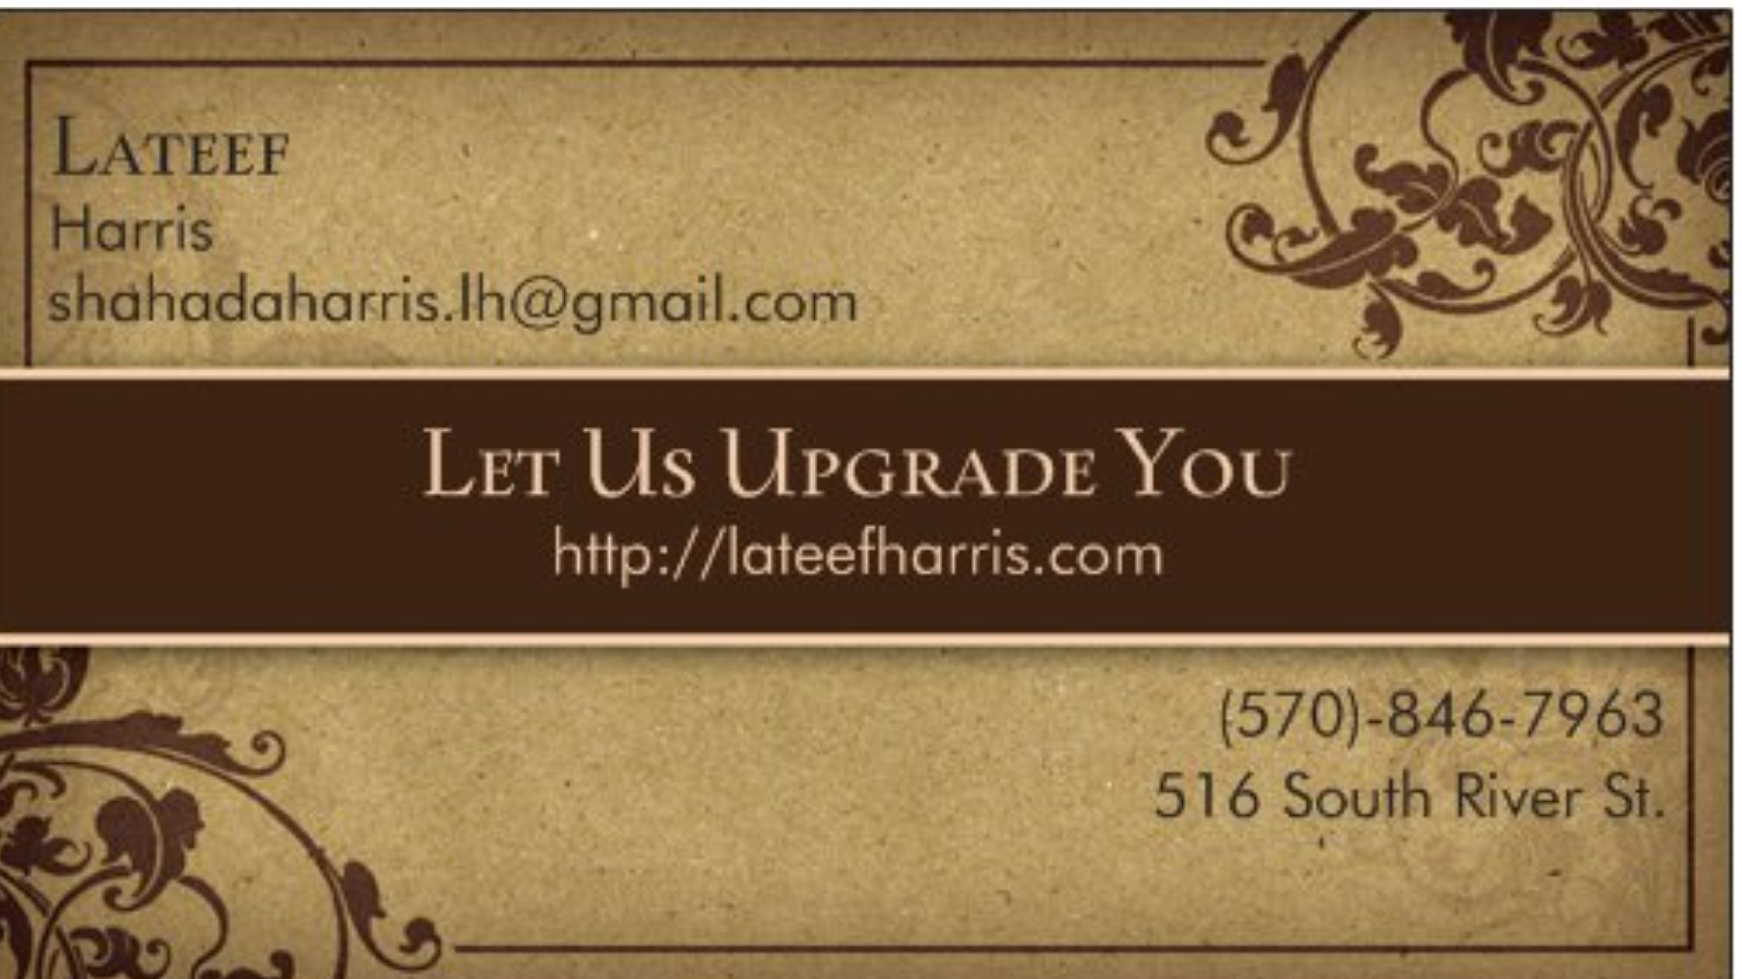 Let Us Upgrade You